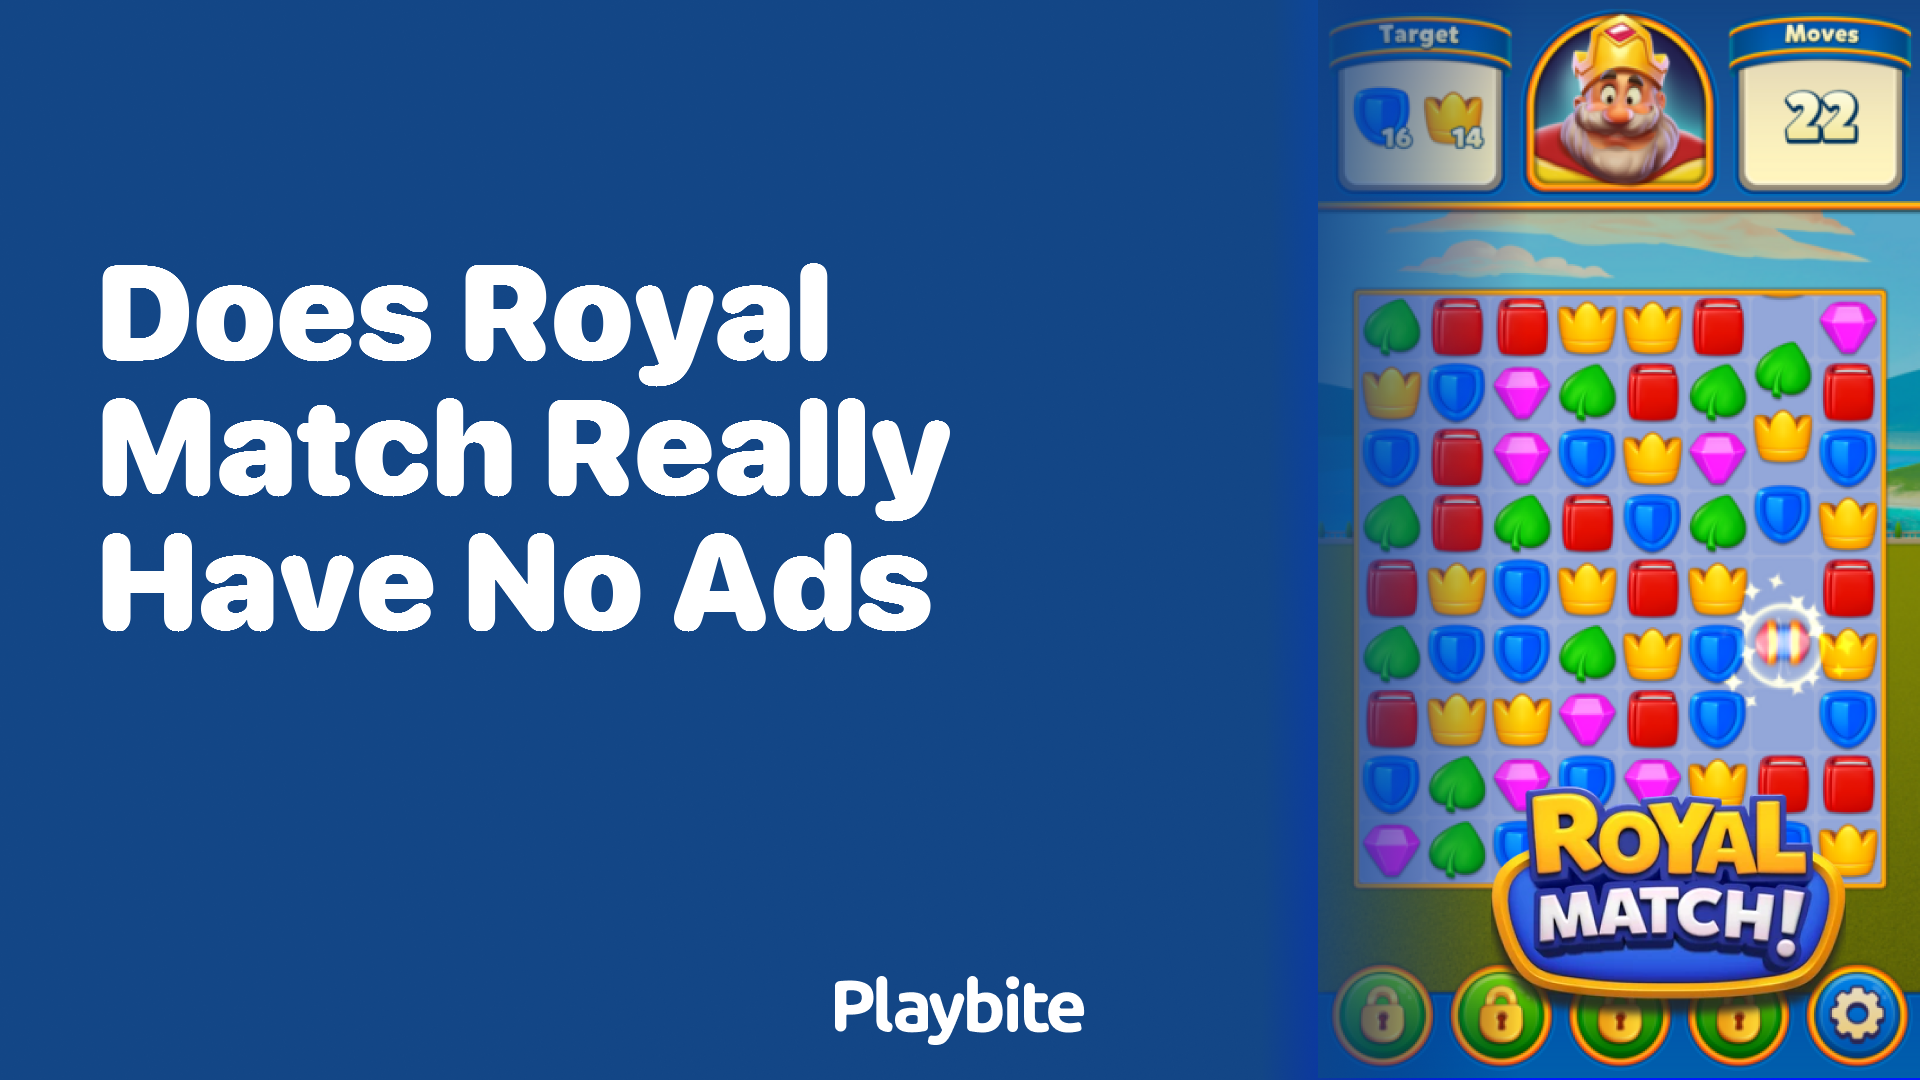 Does Royal Match Really Have No Ads?